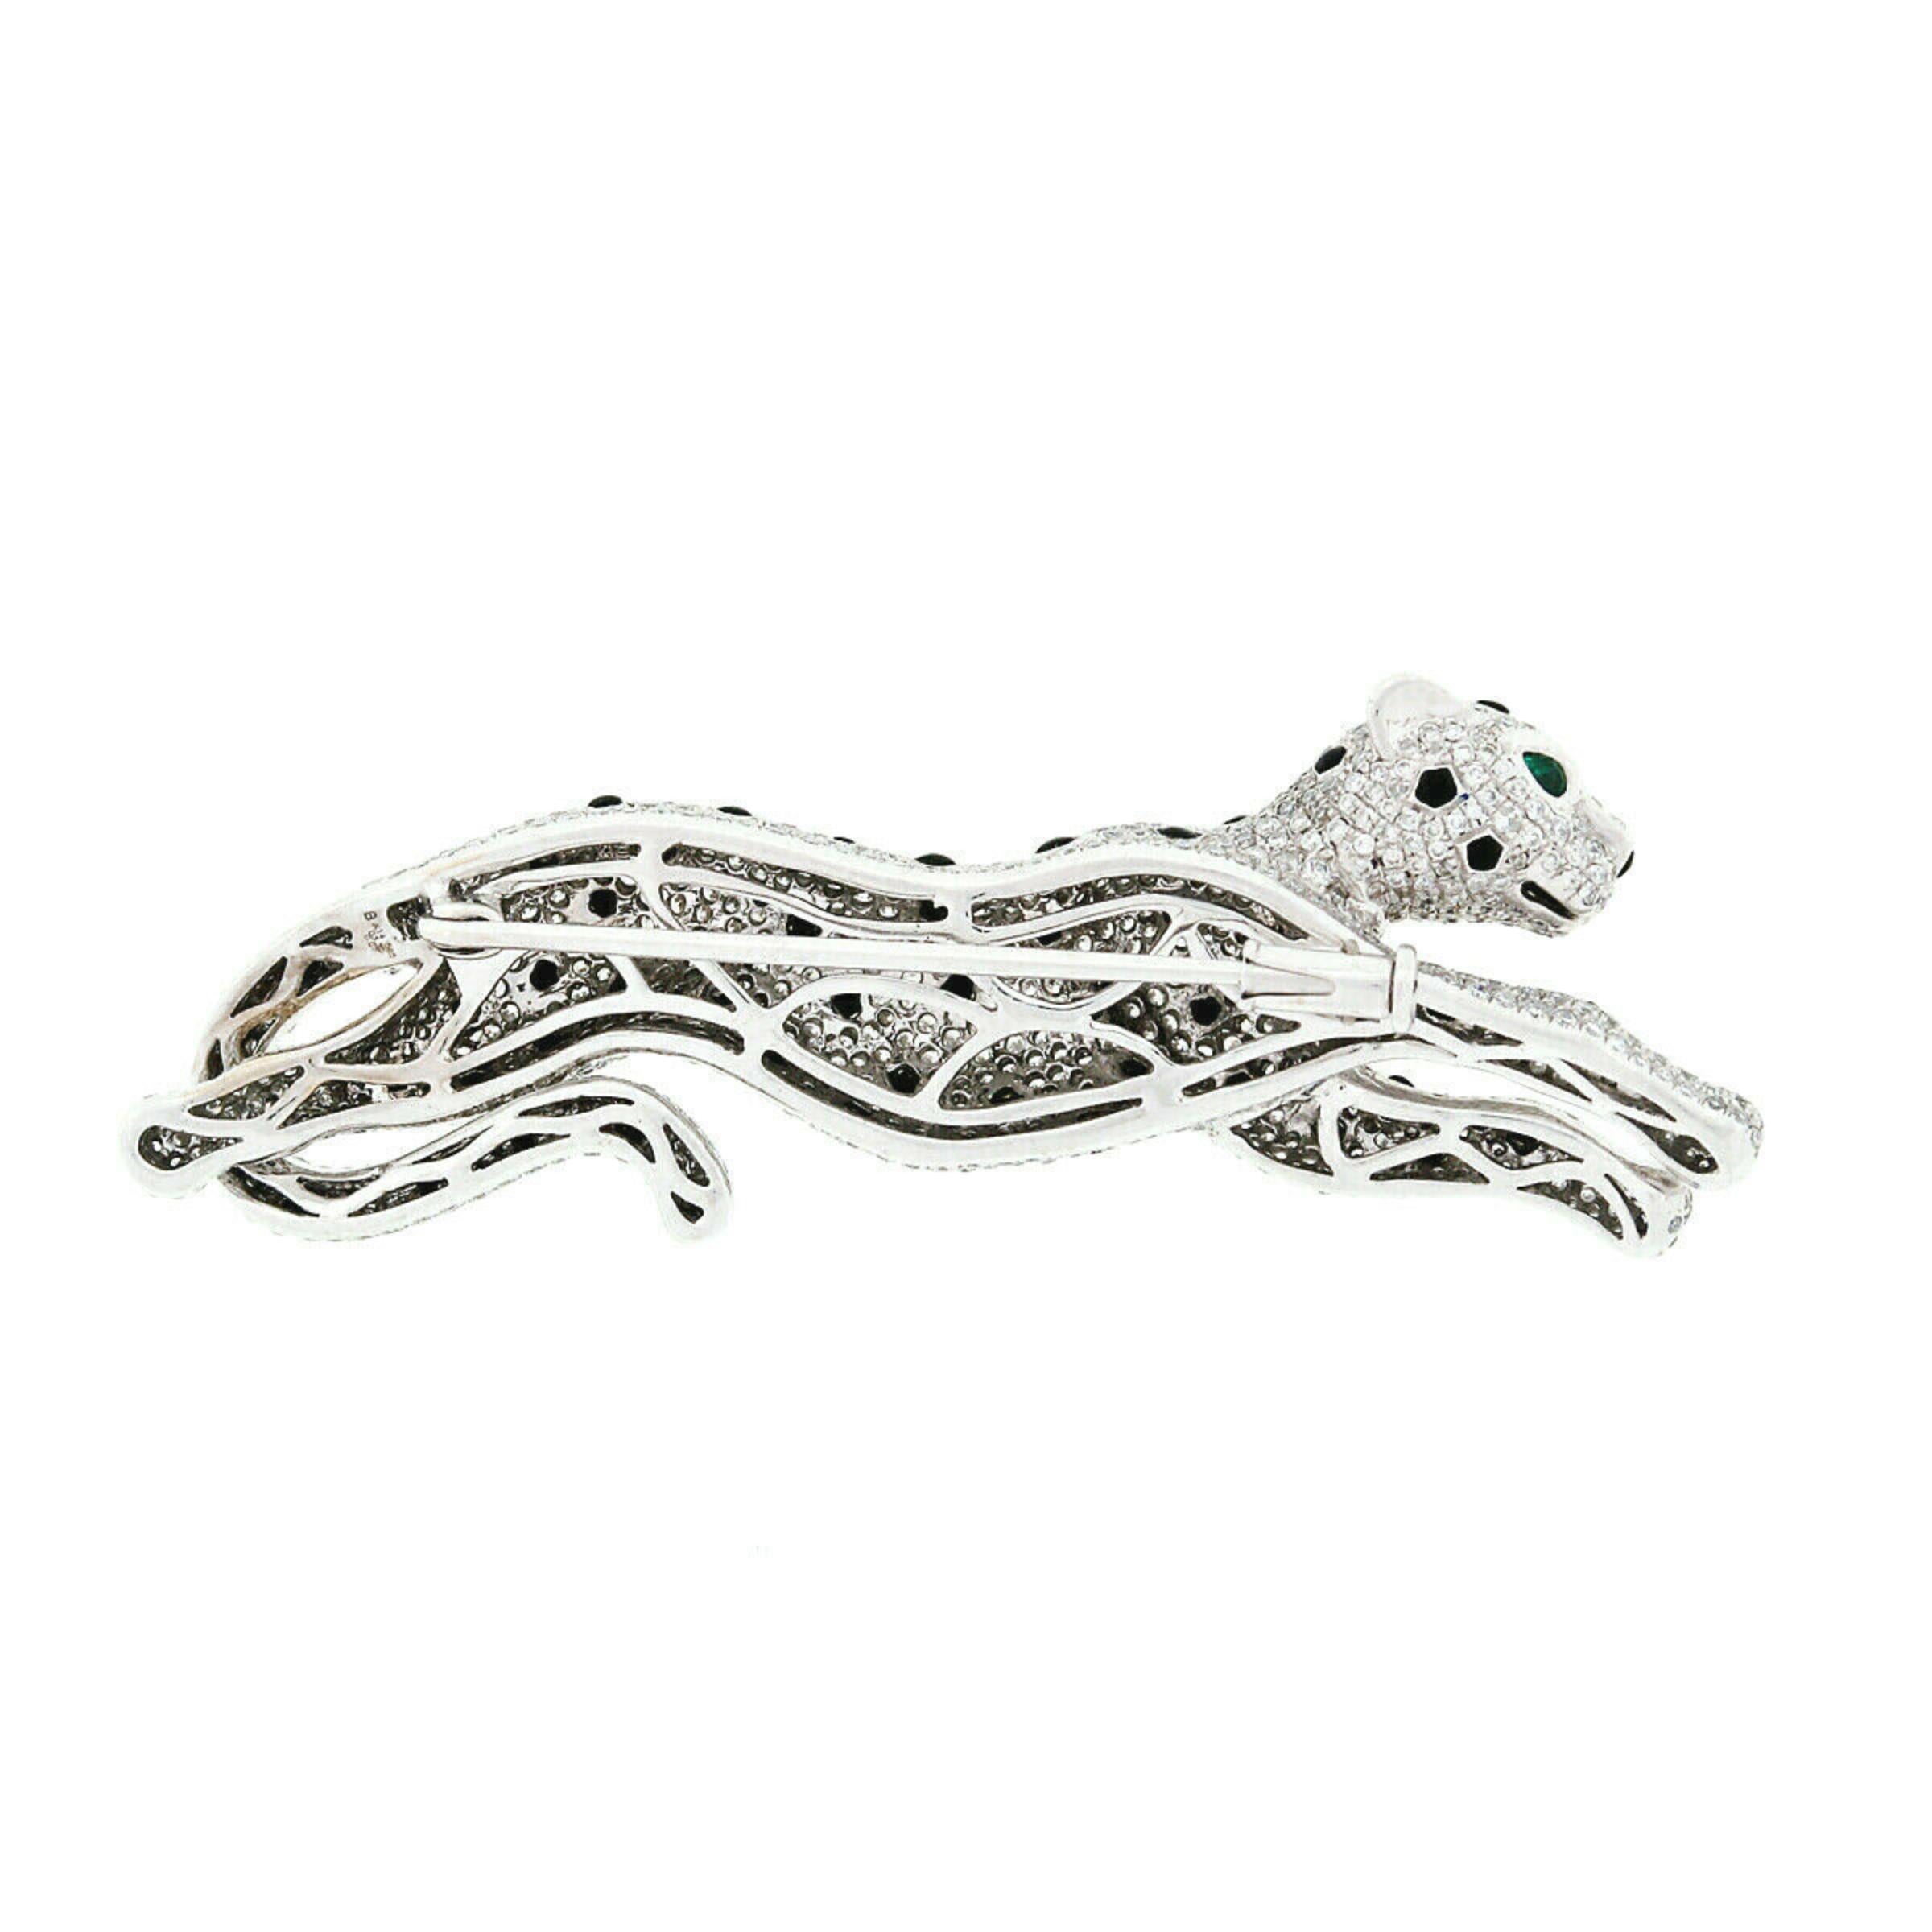 Women's 14k White Gold 3.37ctw Diamond Black Onyx & Emerald Leaping Panther Brooch Pin